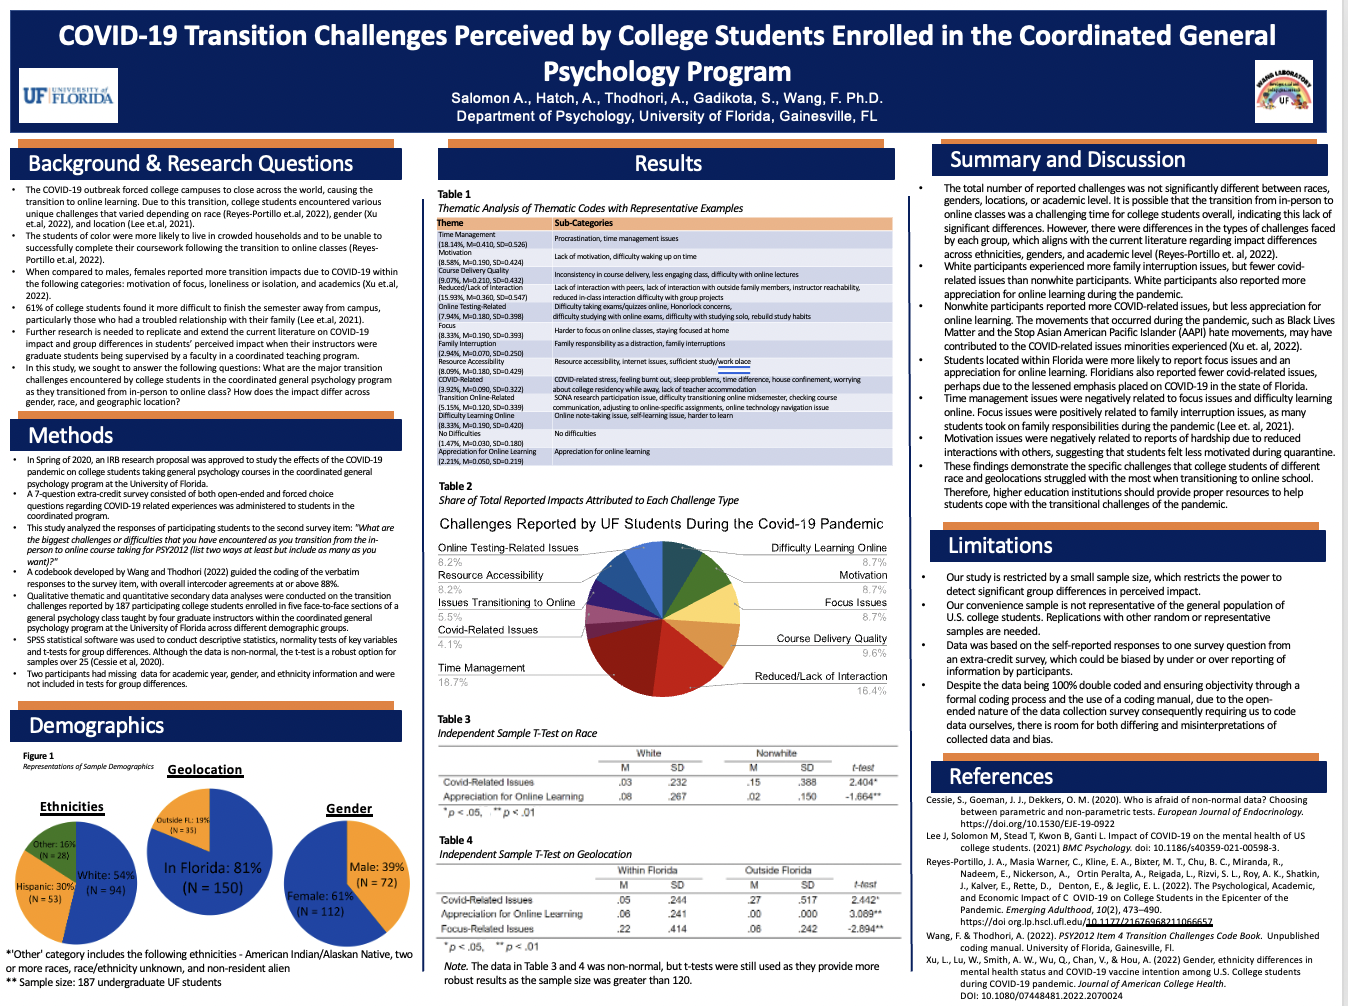 COVID-19 Transition Challenges Perceived By College Students